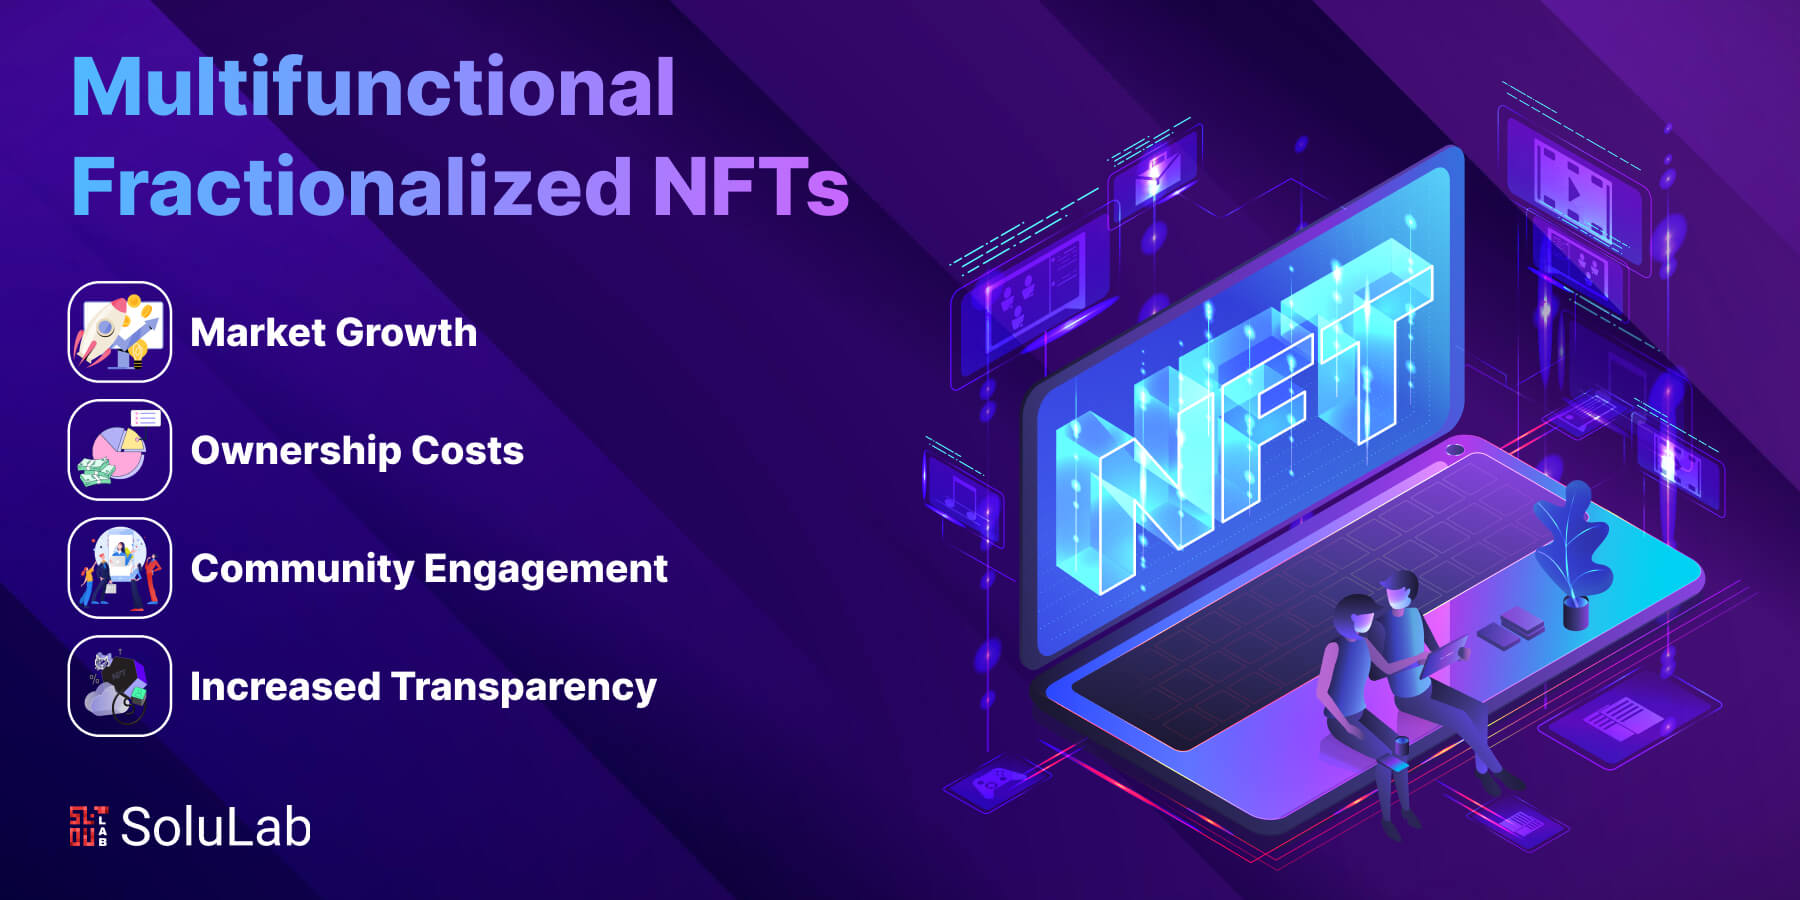 Multifunctional Fractionalized NFTs